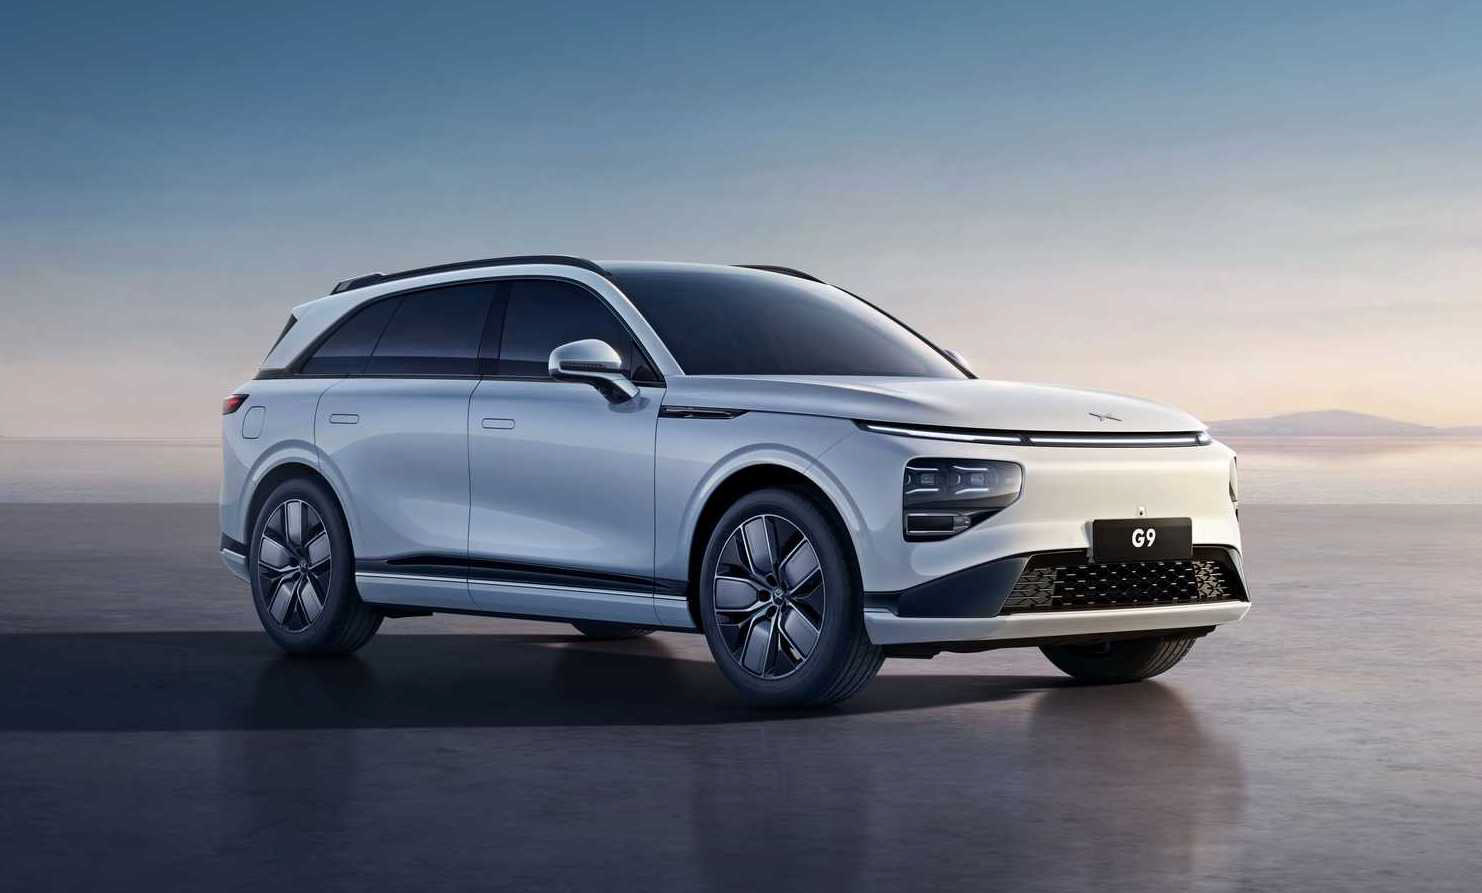 XPeng G9 electric SUV launches in China, industryleading 480kW